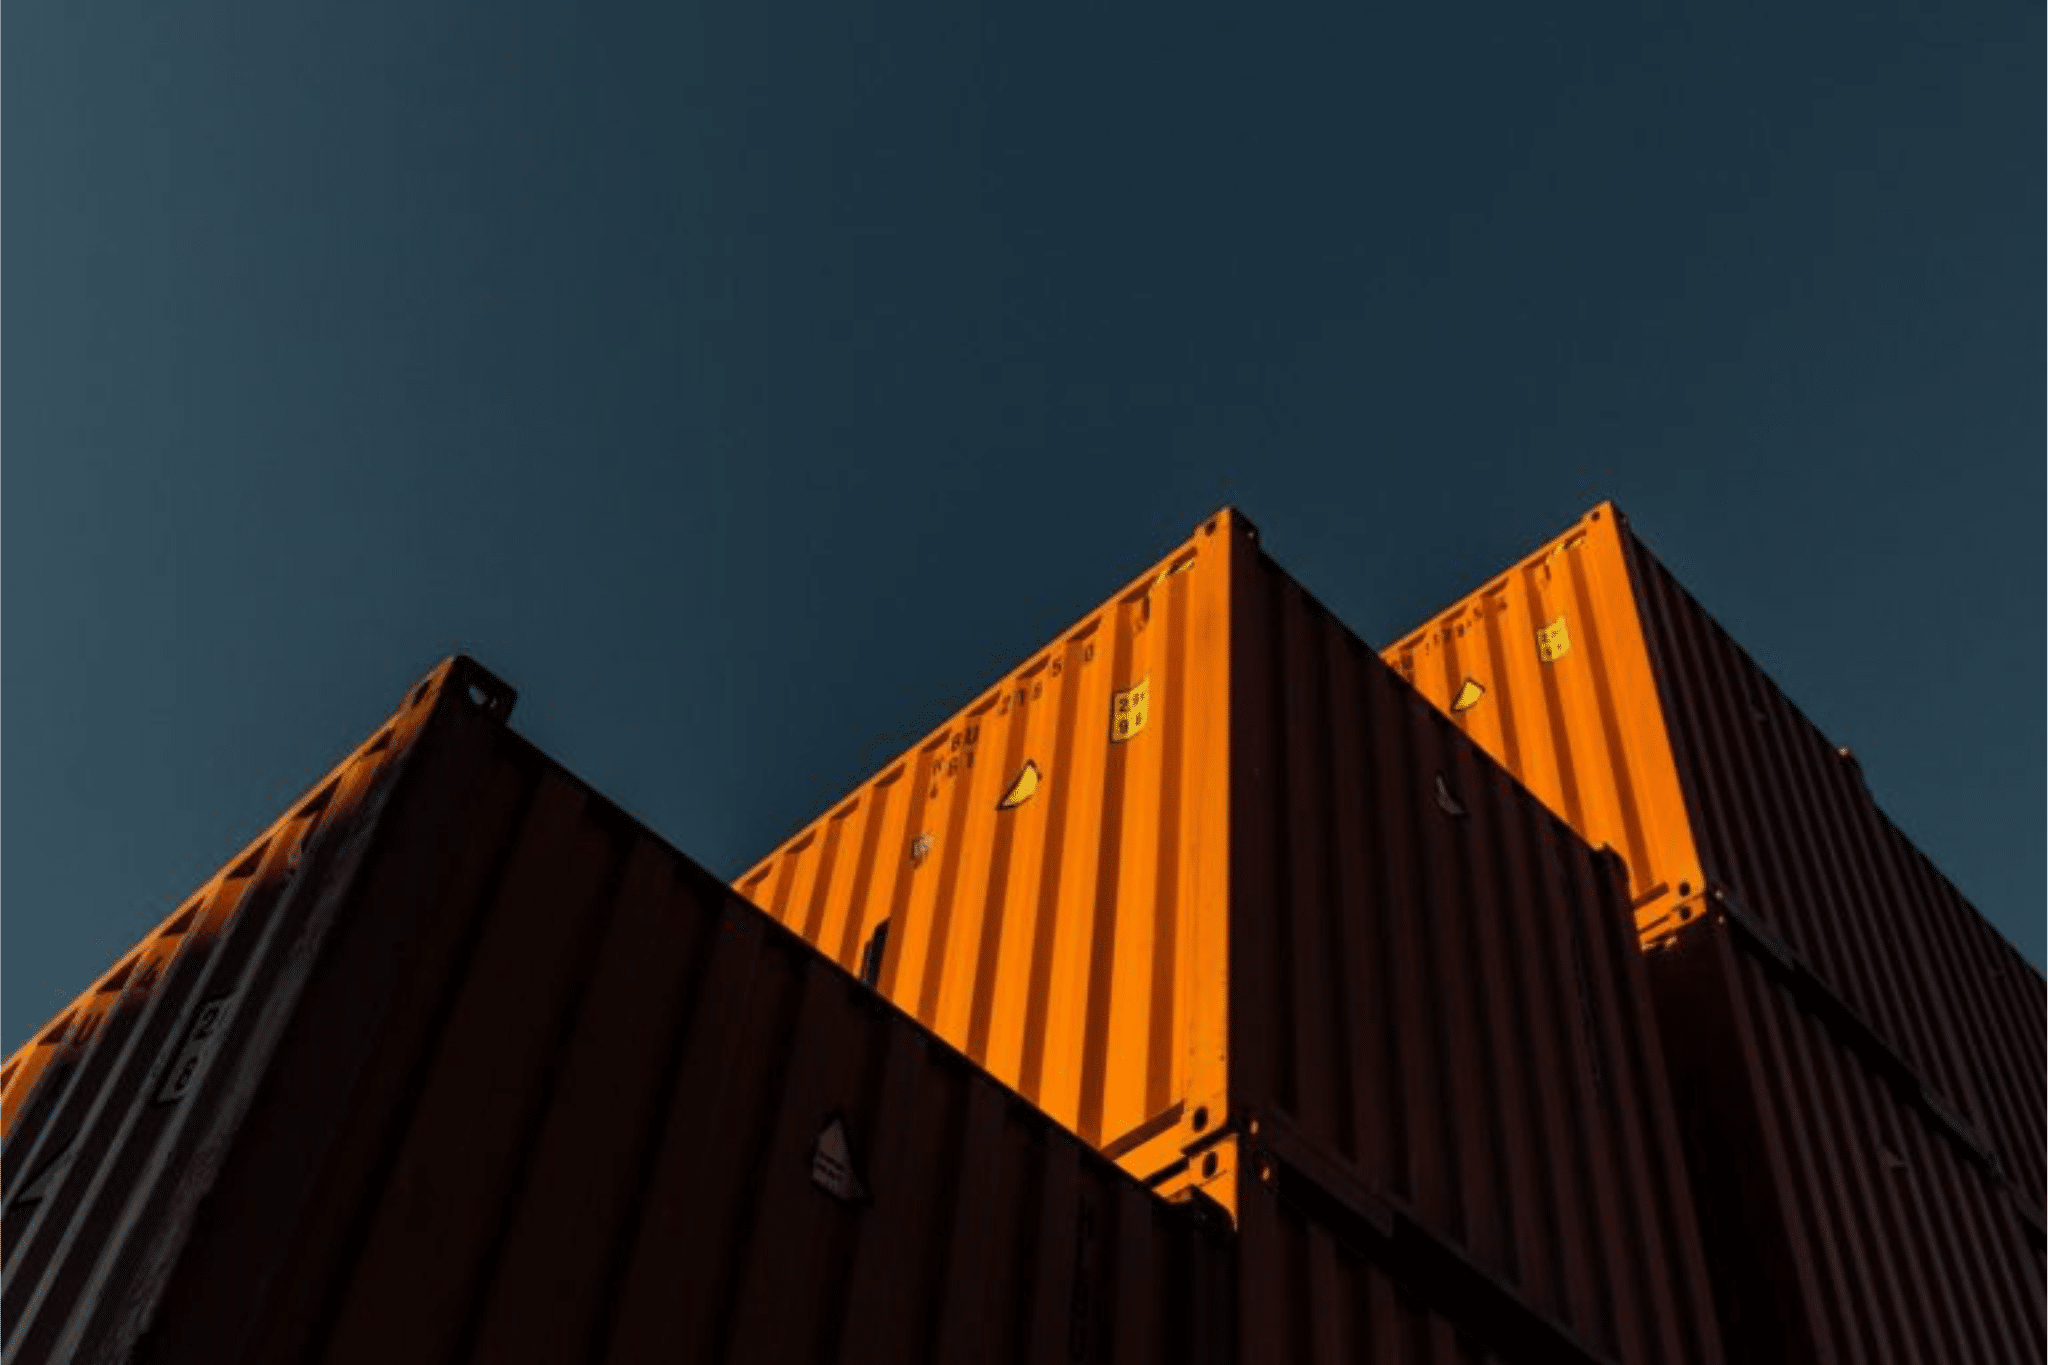 red containers stacked on top of each other with blue sky